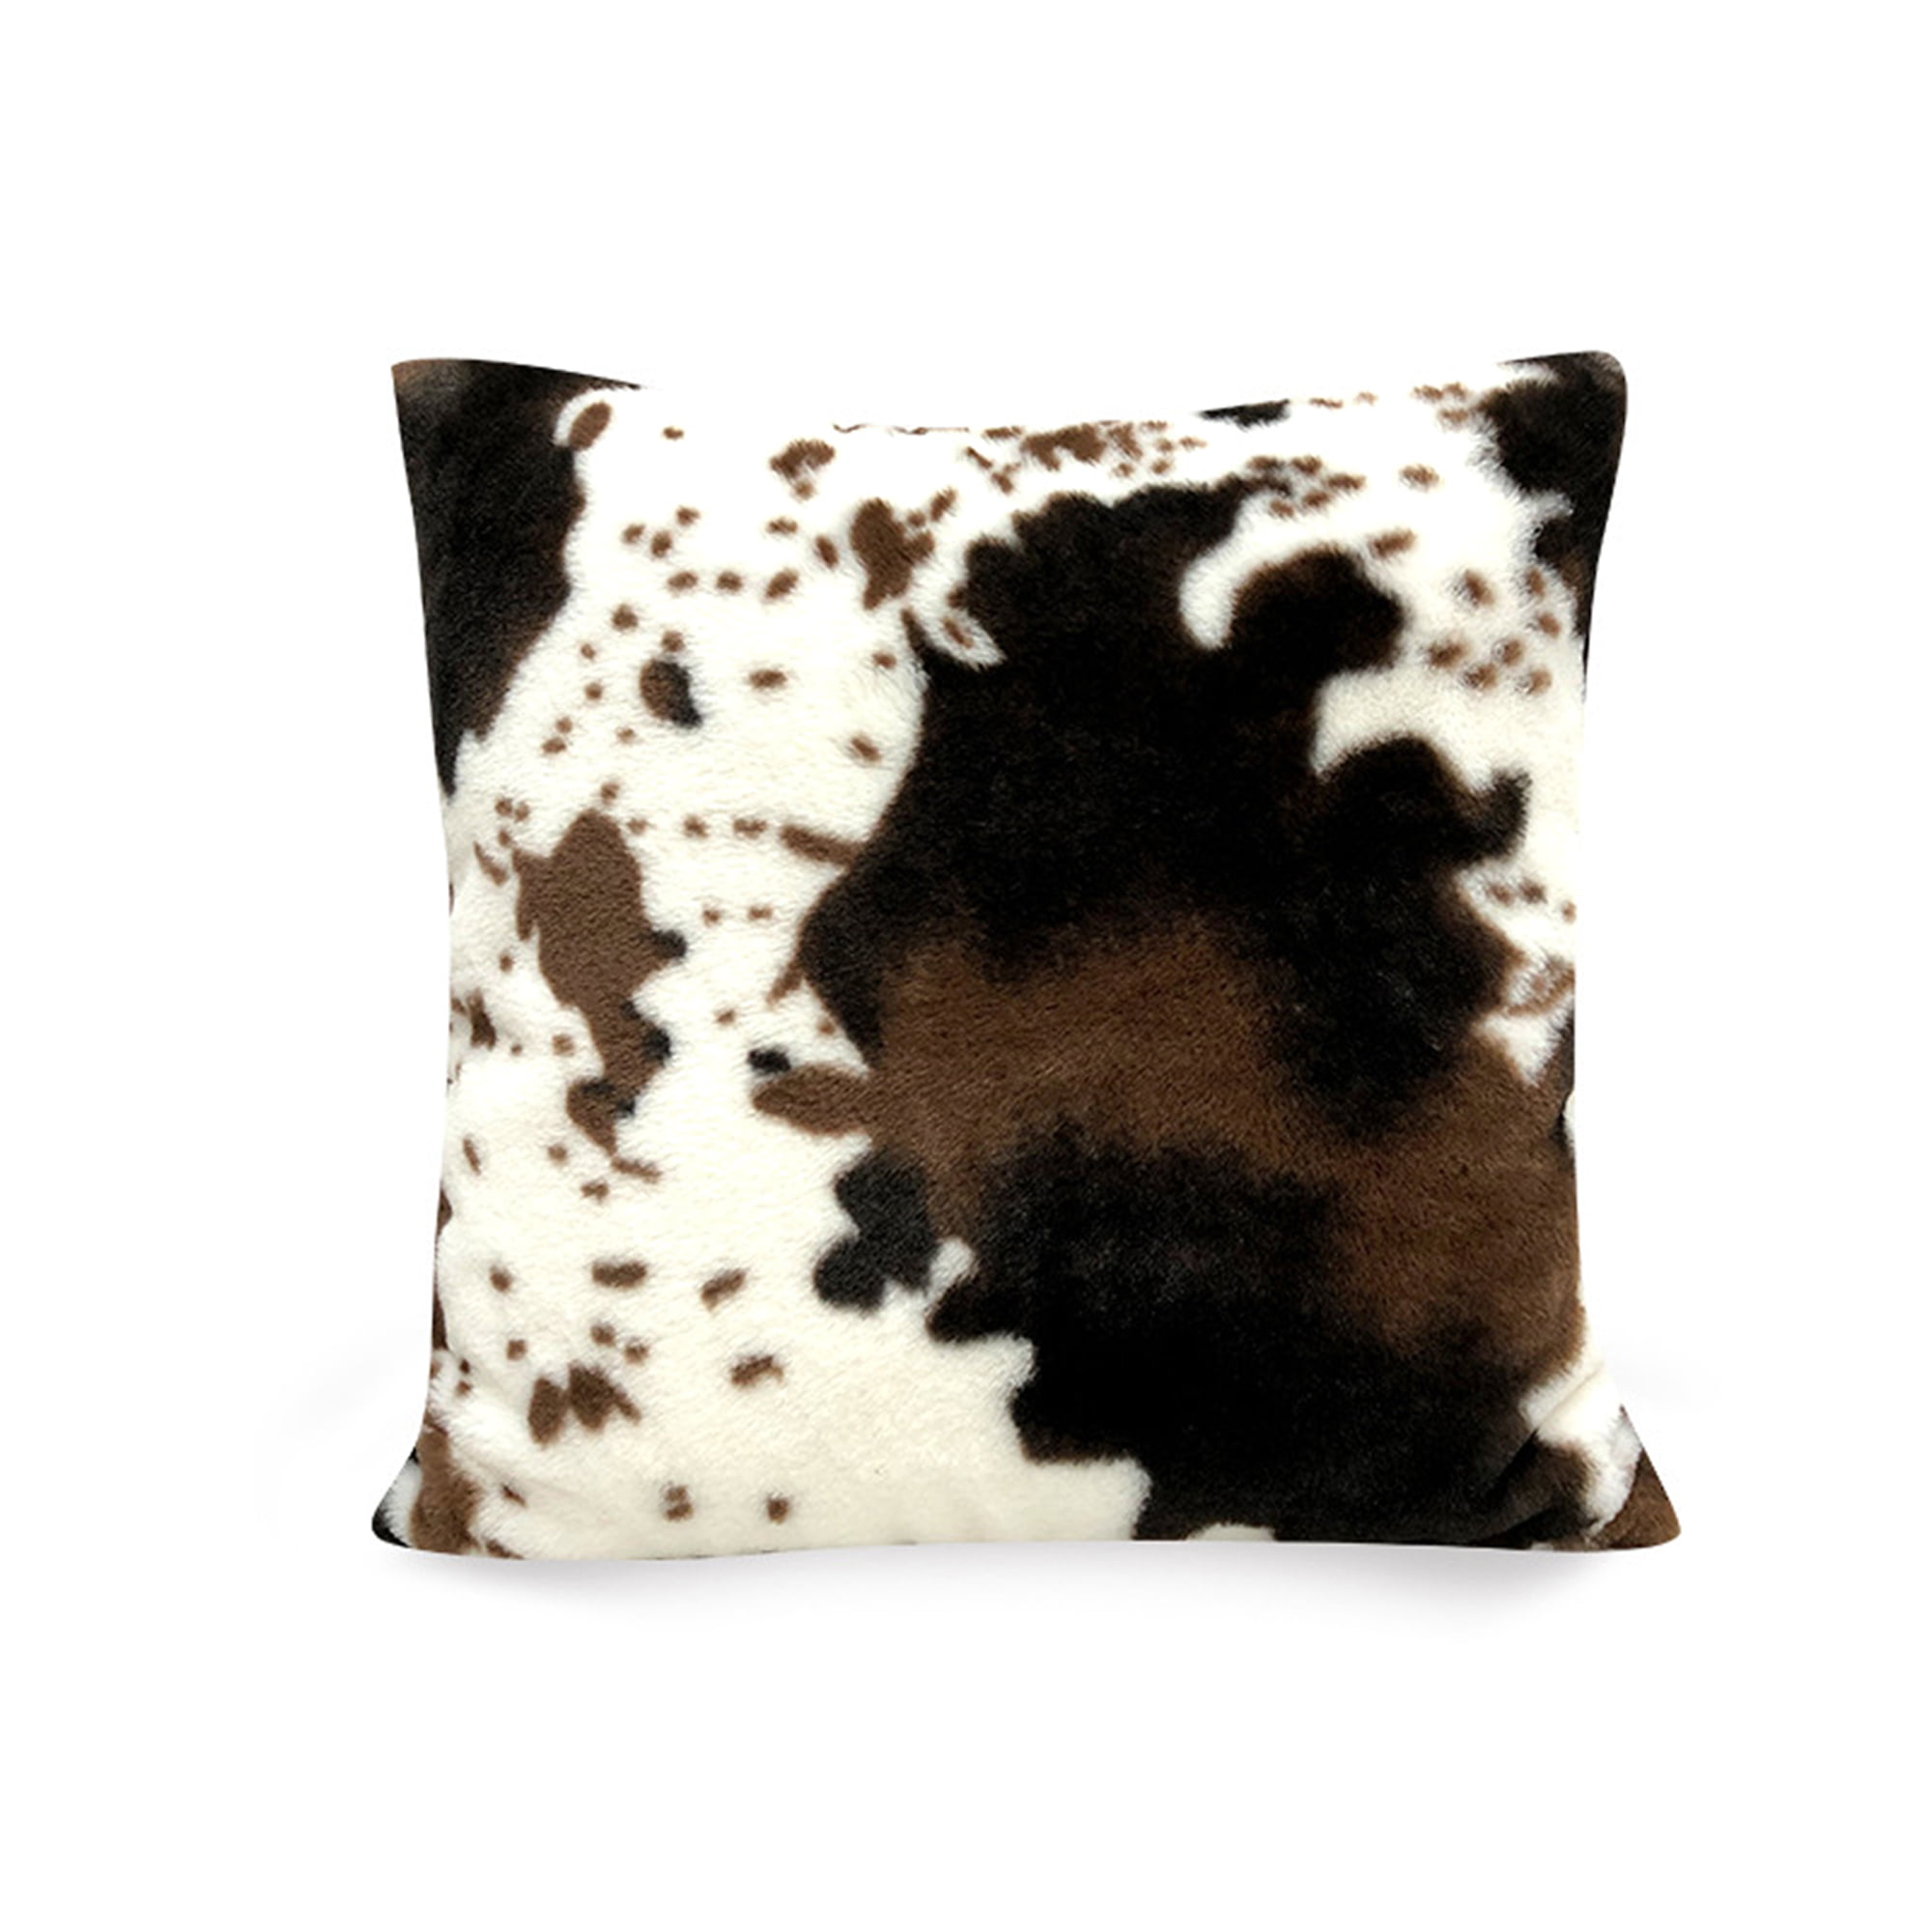 A Black and White 50cm Cowhide Cushion Cover A Beautiful Living Accessory